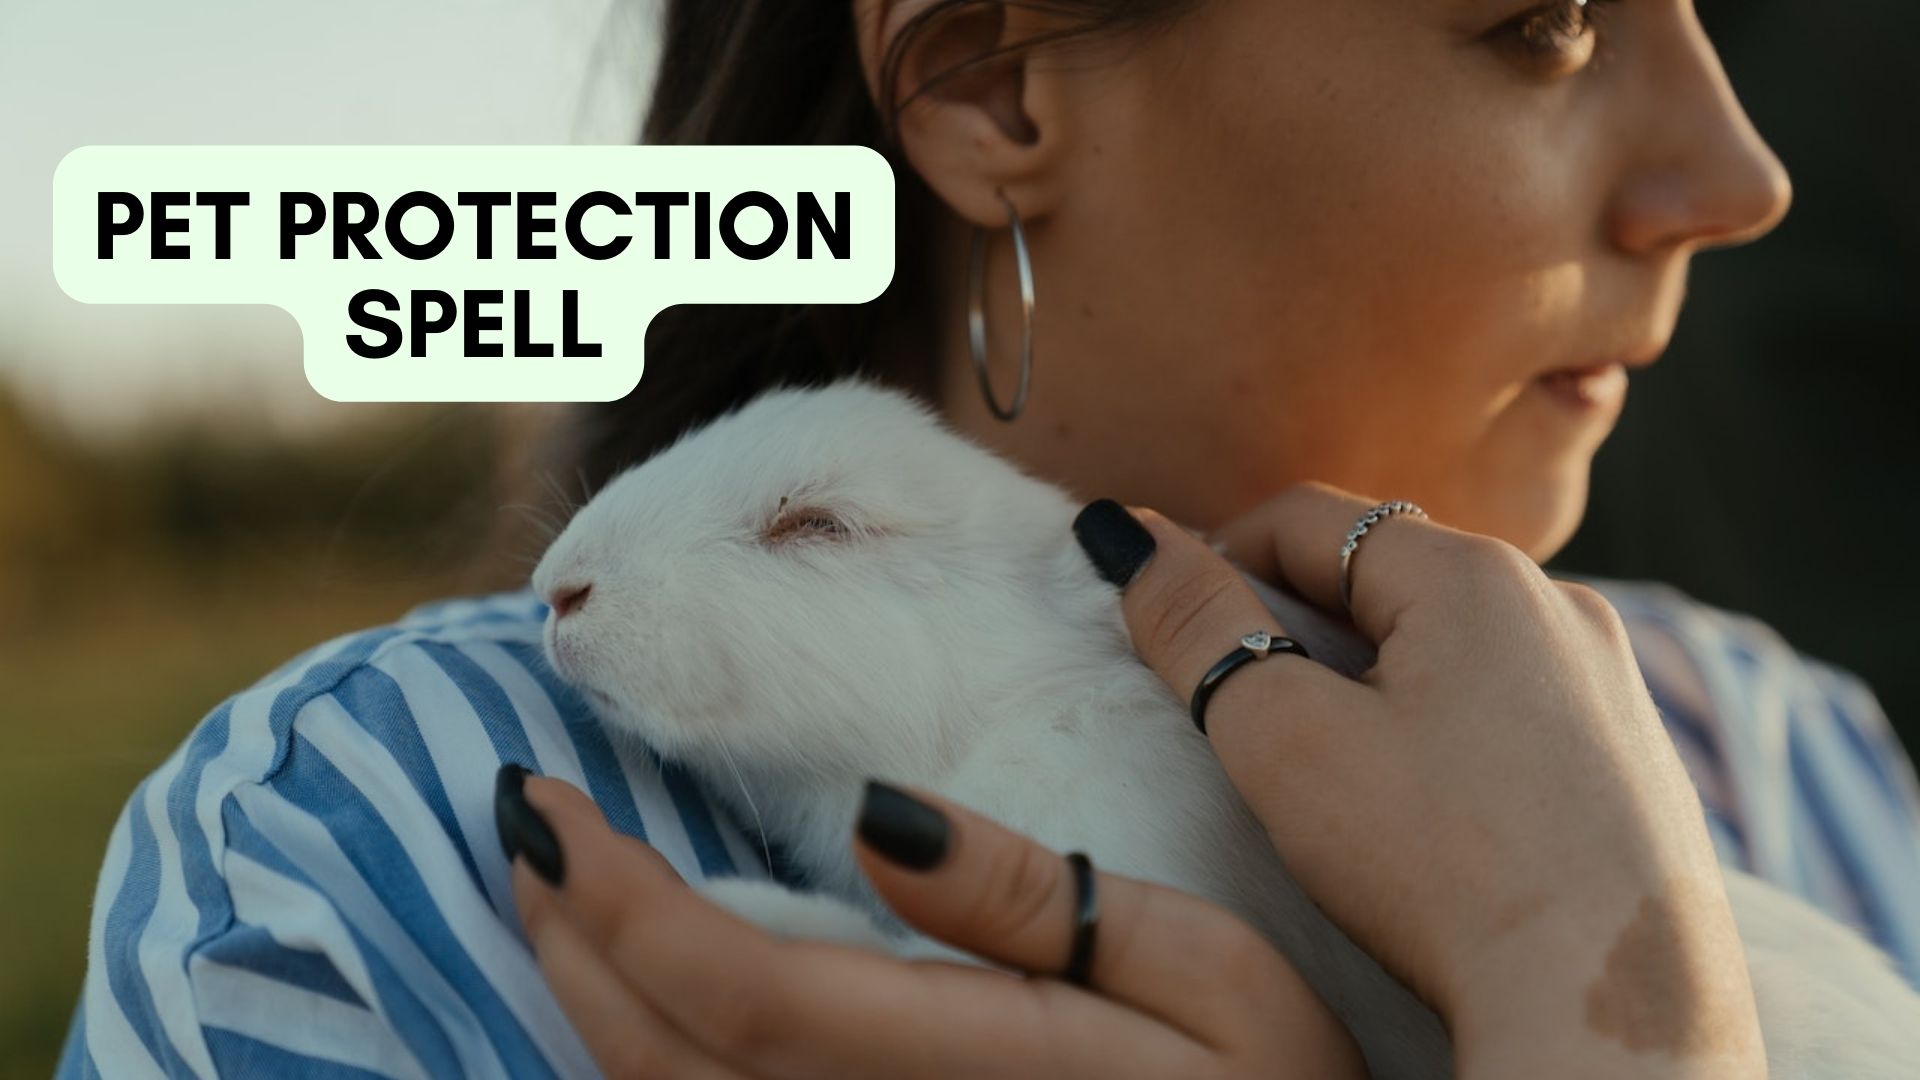 Pet Protection Spell - Perfect Way To Protect Your Pet